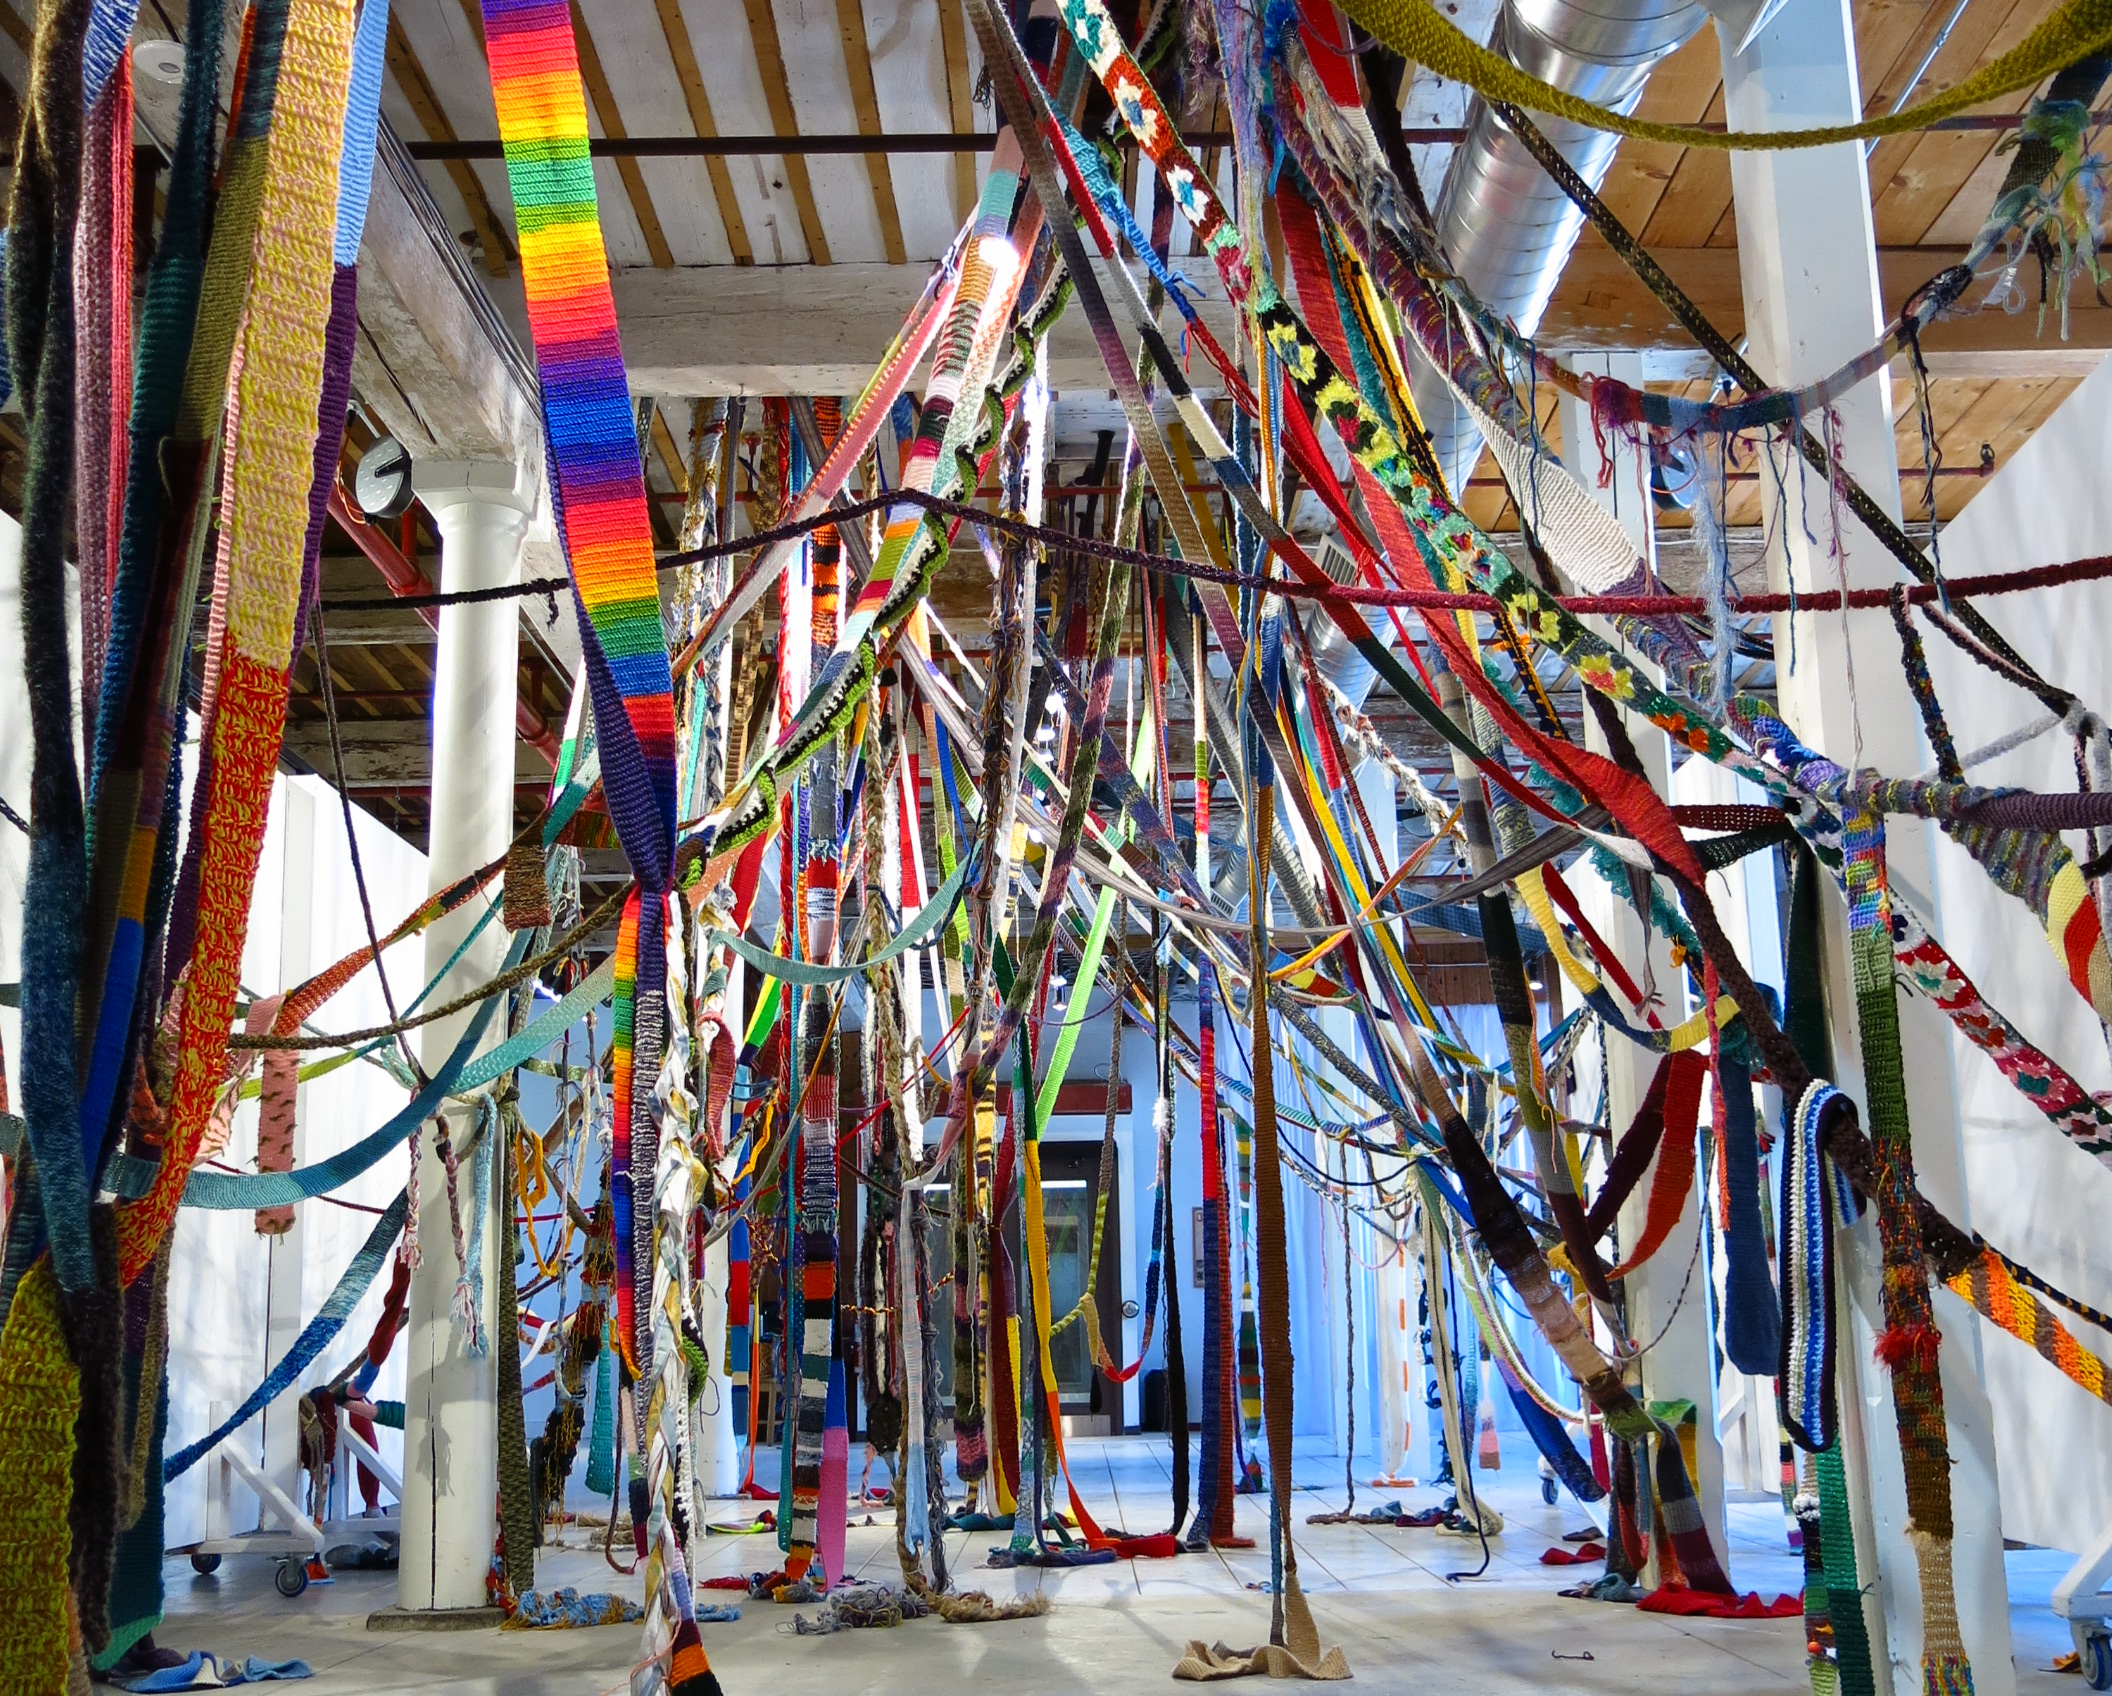 Ribbons of brightly coloured textiles hang from a ceiling in a museum